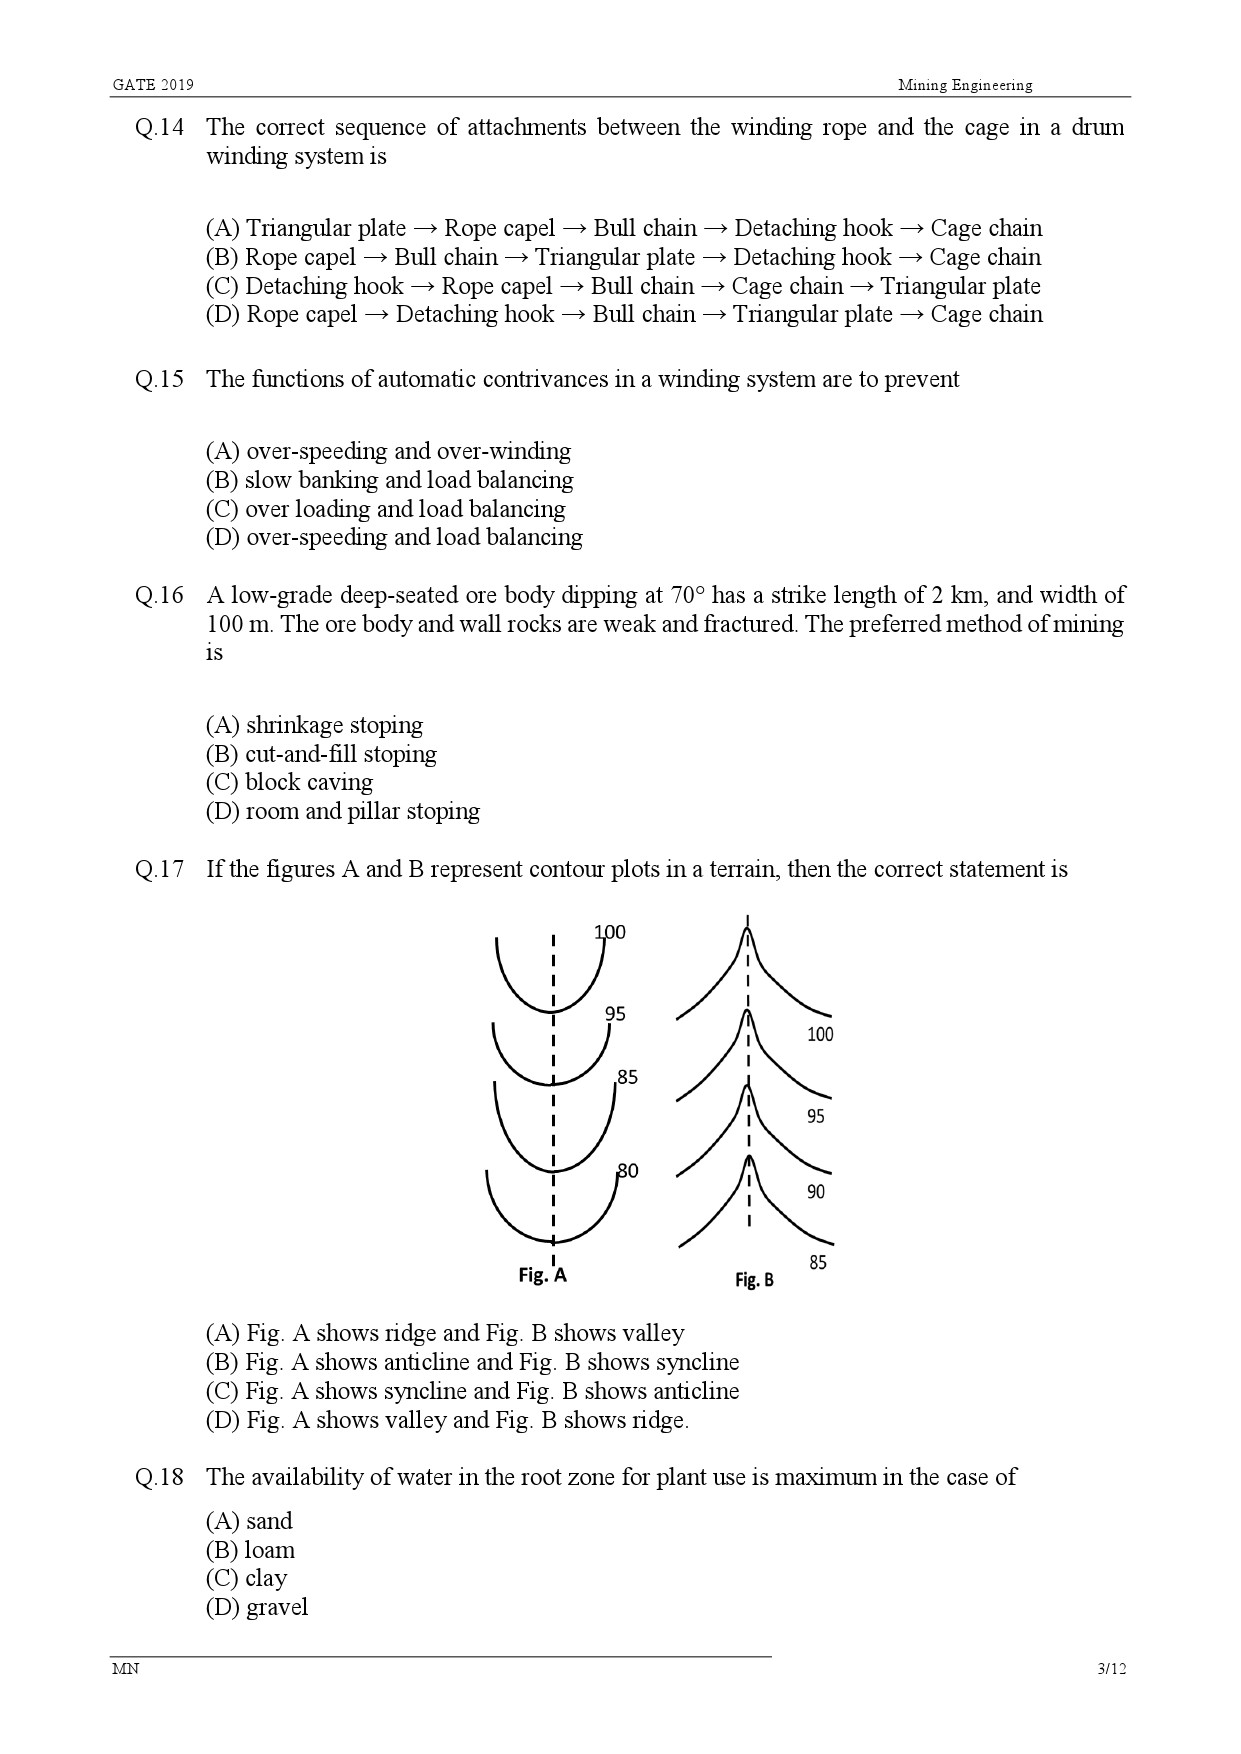 GATE Exam Question Paper 2019 Mining Engineering 6